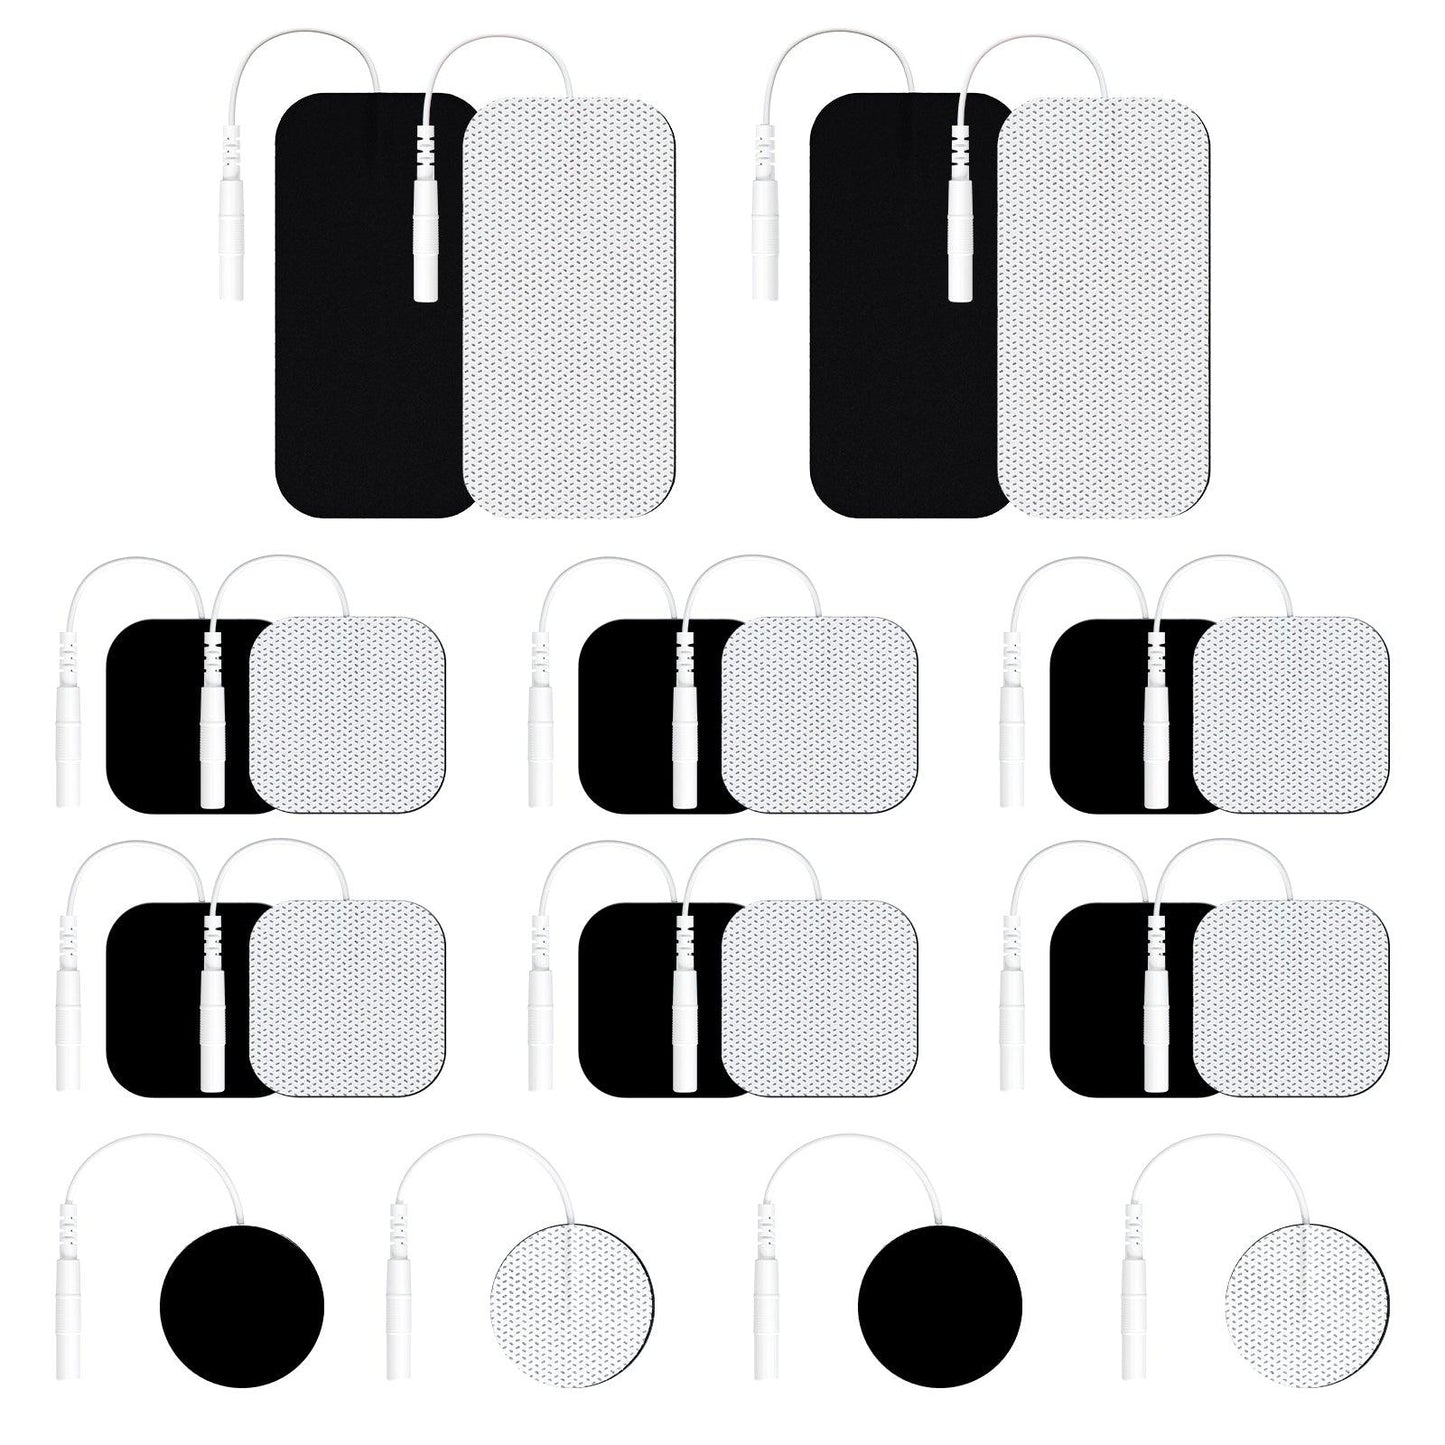 https://auvonhealth.com/cdn/shop/files/auvon-tens-unit-replacement-pads-combination-set-20-packs-multiple-sizes-electrodes-for-tens-unit-reusable-and-latex-free-pigtail-tens-pads-for-multiple-pain-relief-2mm-connector-auvo.jpg?v=1686019736&width=1445